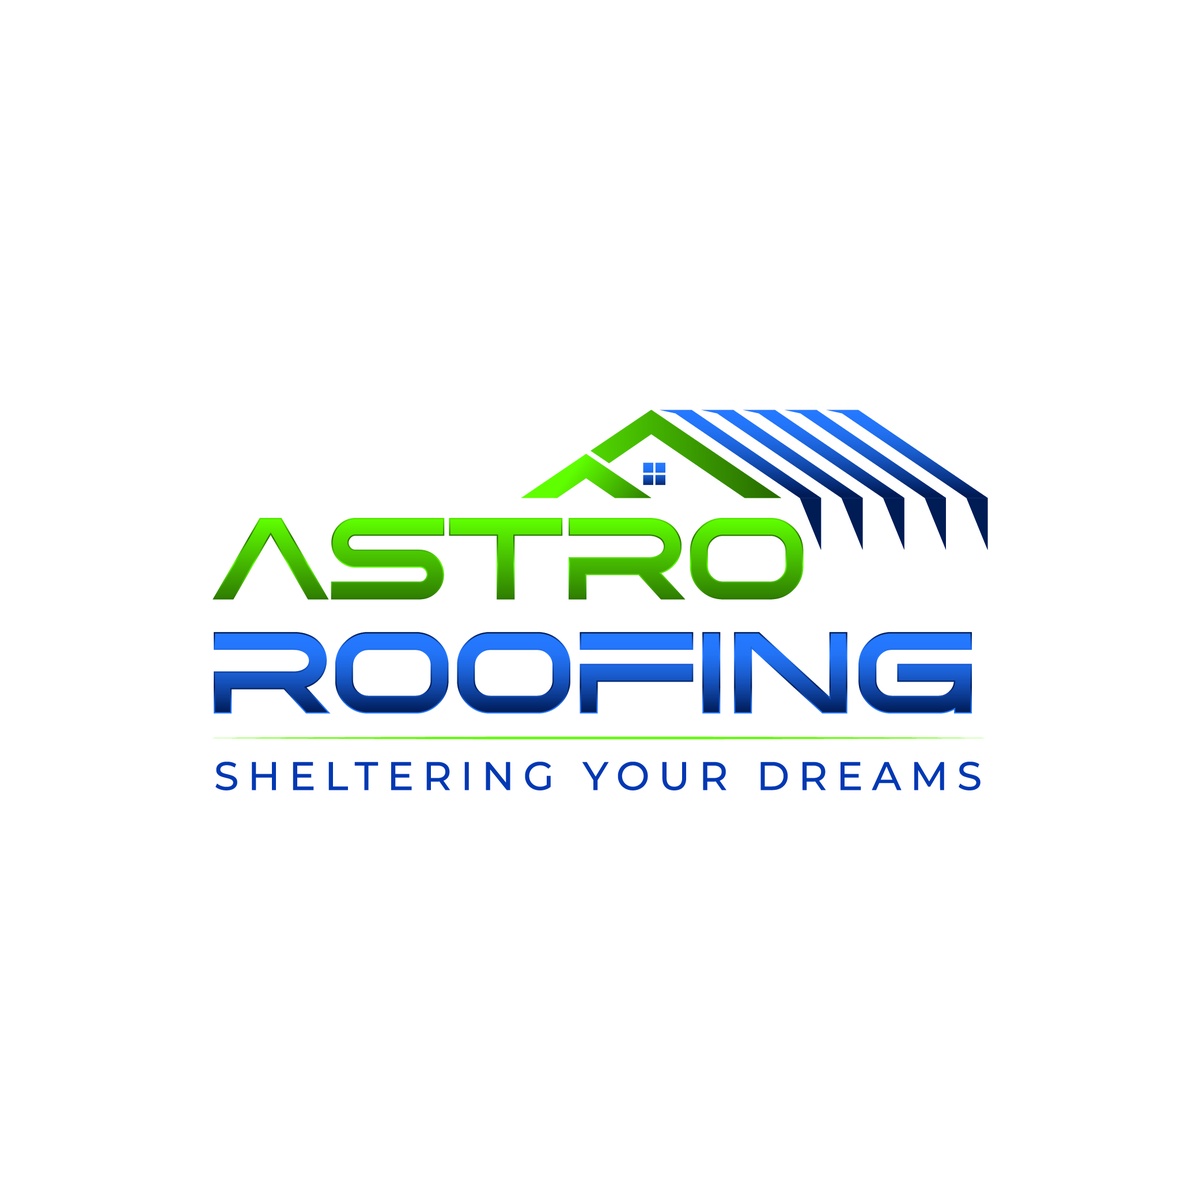 Astro Roofing Kirkland's Premier Choice for Professional Roofing Services